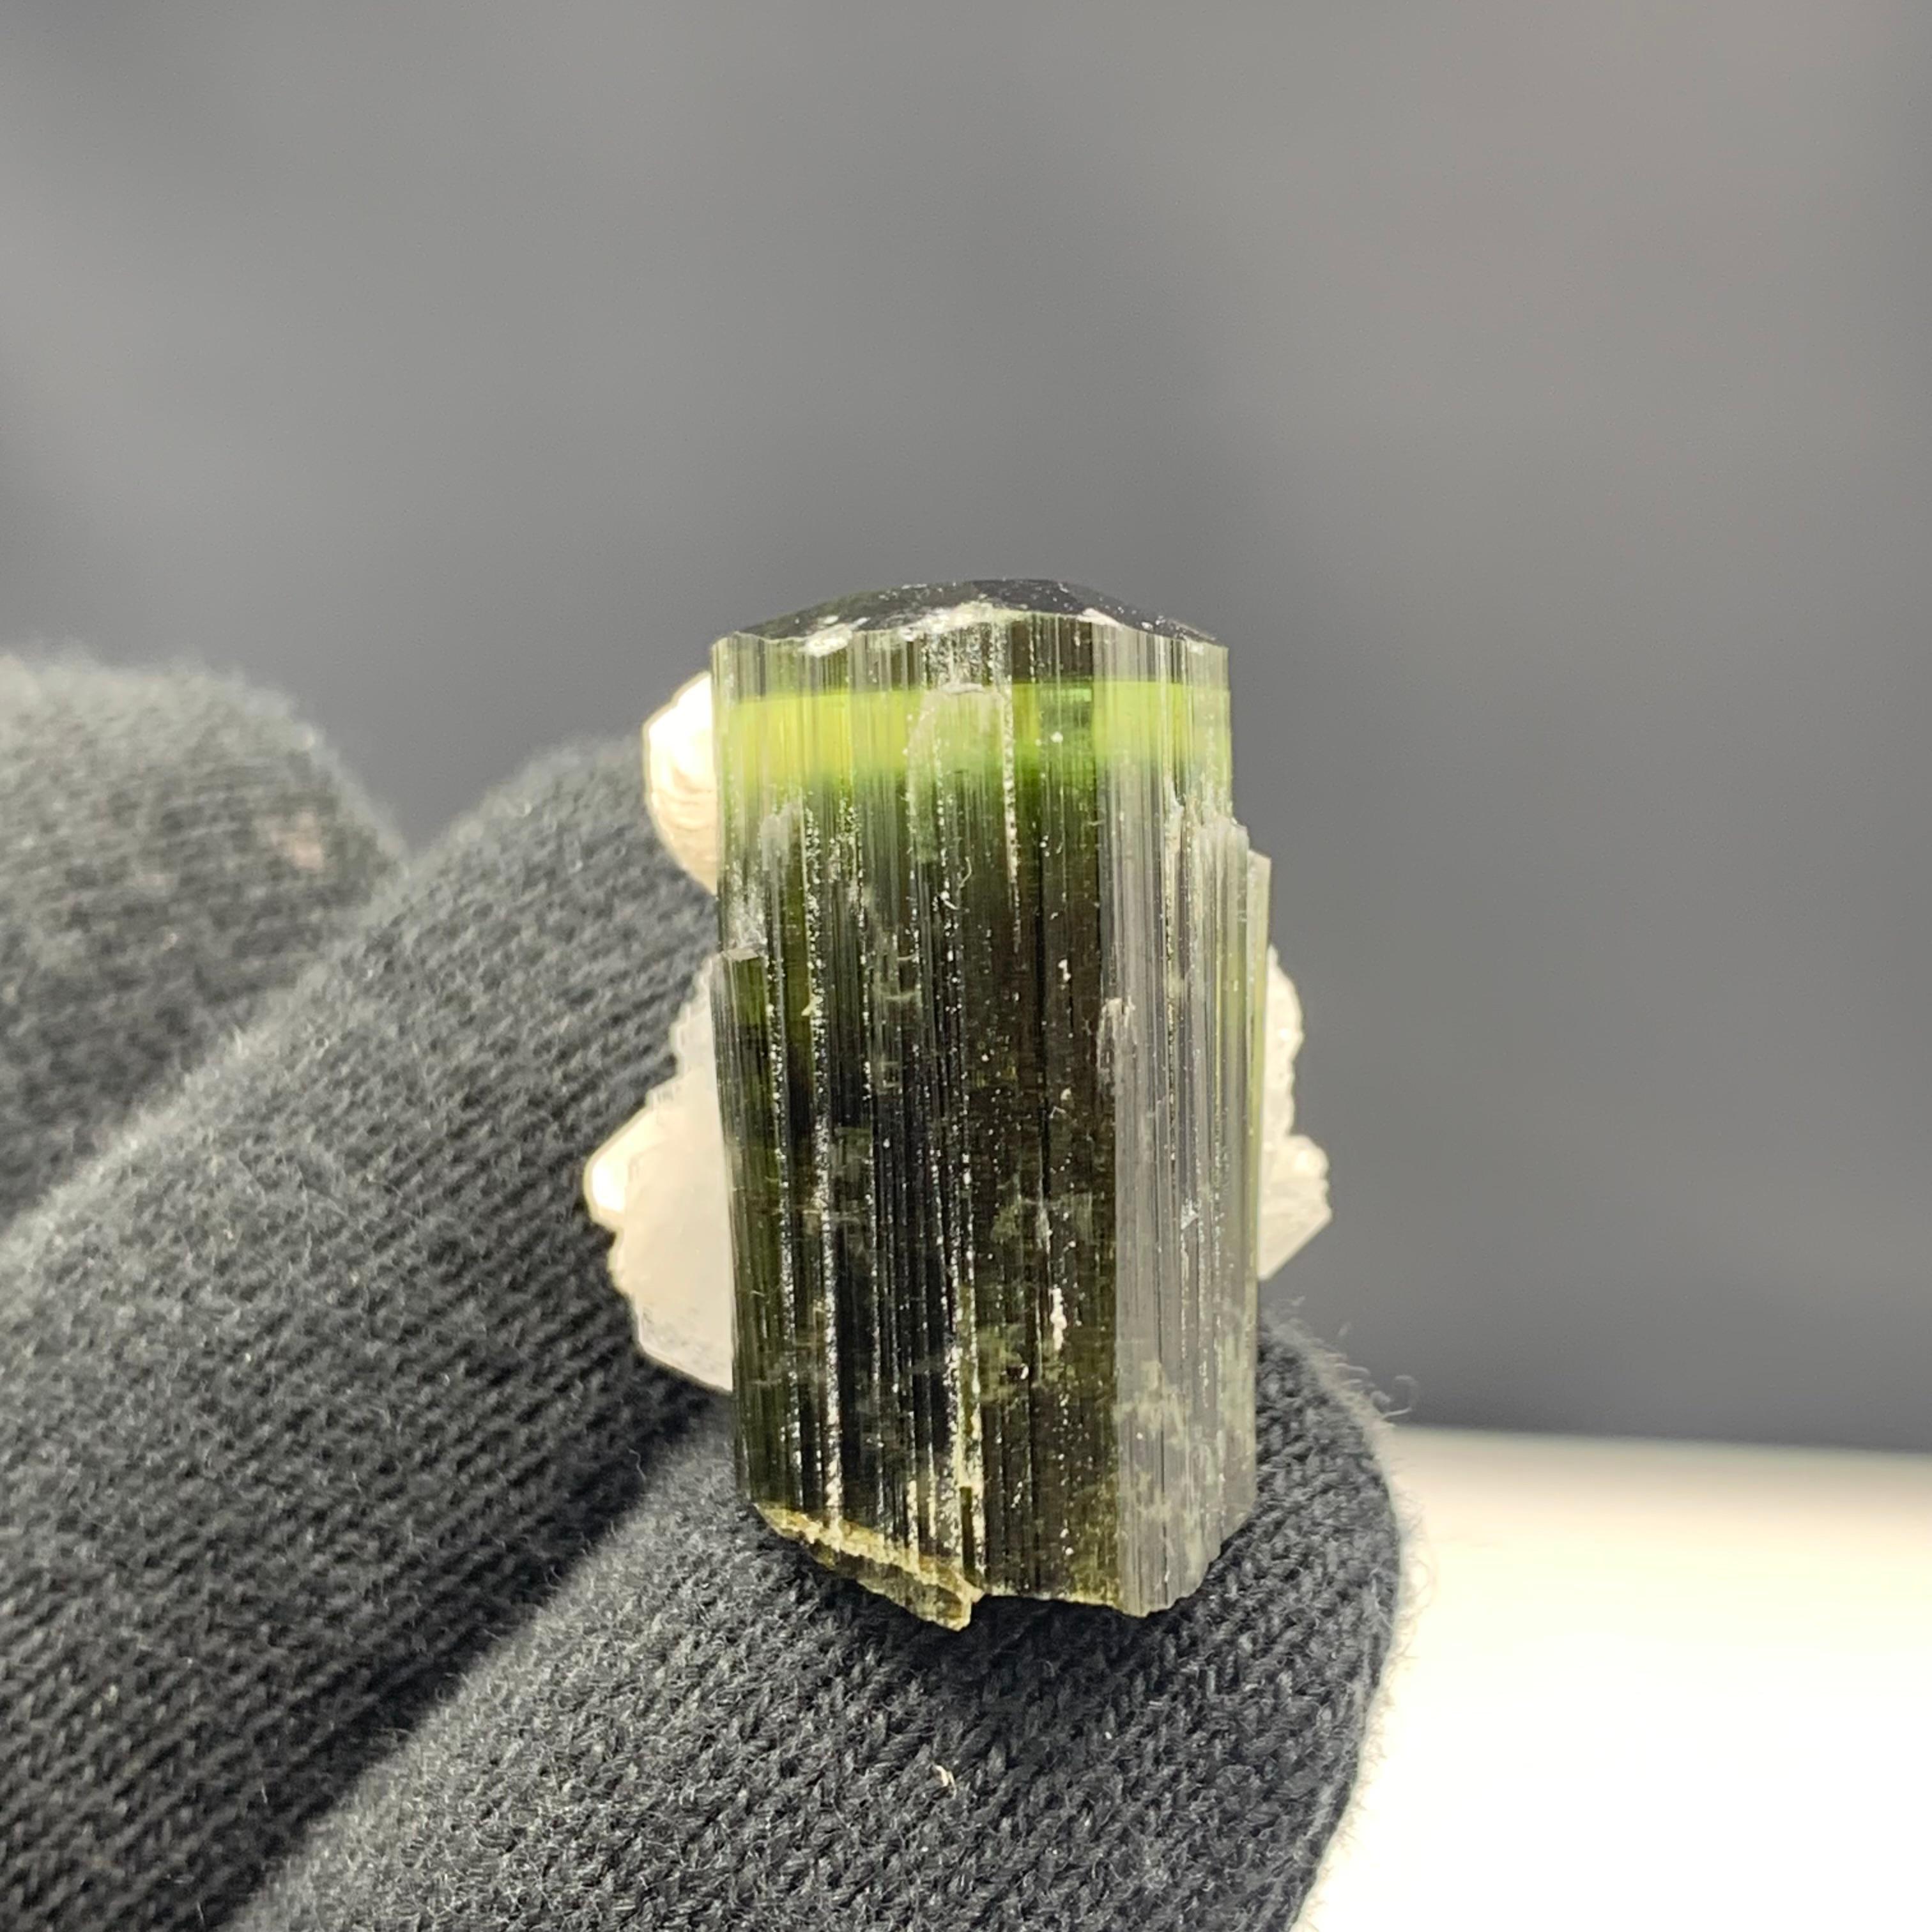 43.85 Carat Gorgeous Tourmaline Specimen With Albite From Skardu, Pakistan 

Weight: 43.85 Carat 
Dimension: 2.3 x 1.7 x 2.2 Cm 
Origin: Skardu Valley, Pakistan 

Tourmaline is a crystalline silicate mineral group in which boron is compounded with